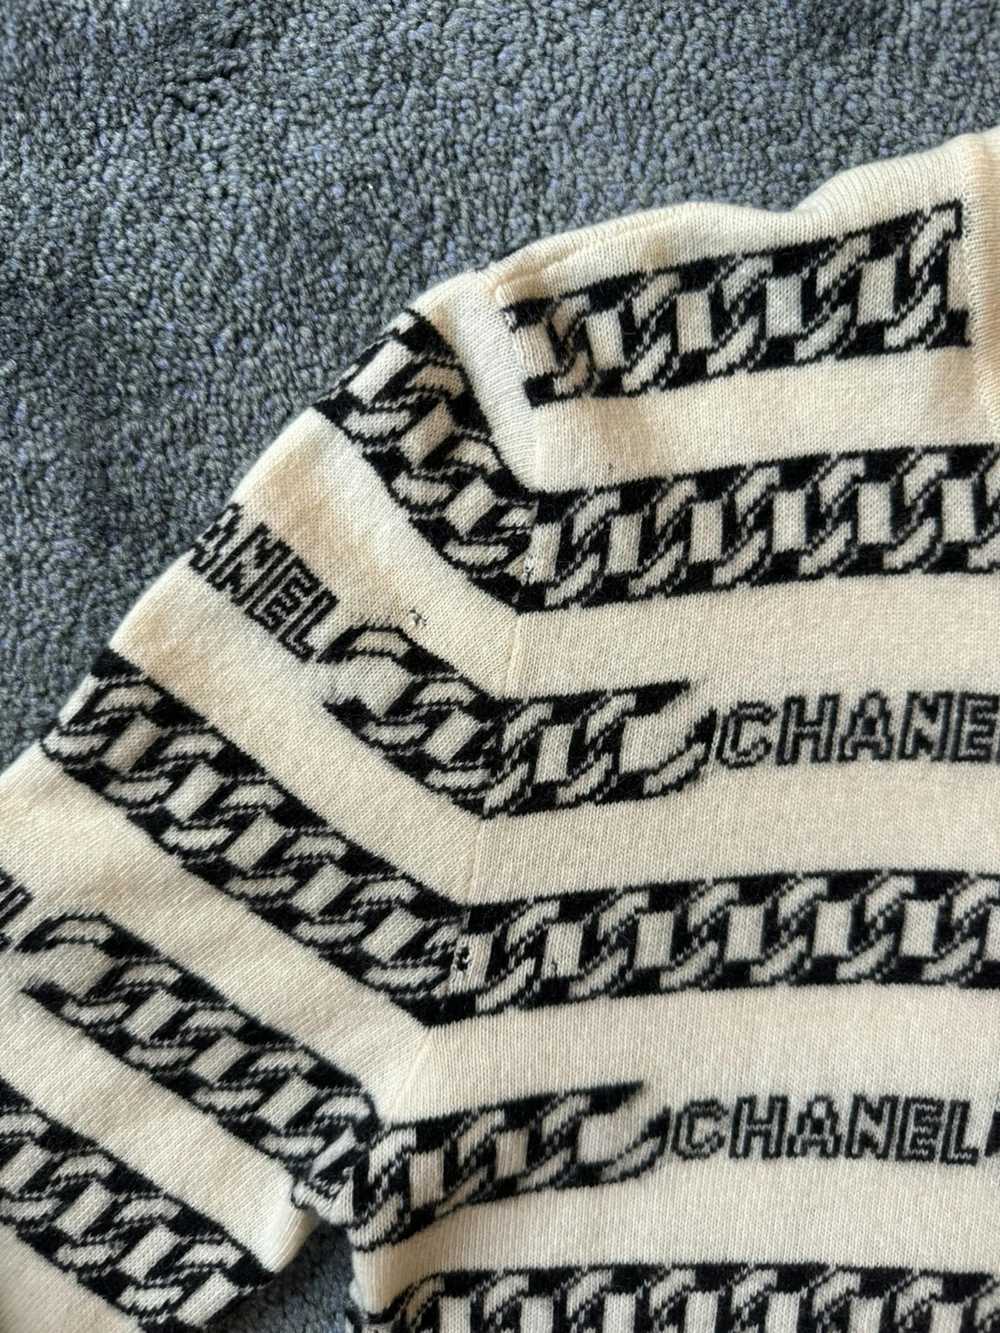 Chanel × Vintage 2001 Chanel By Karl Lagerfeld - image 5